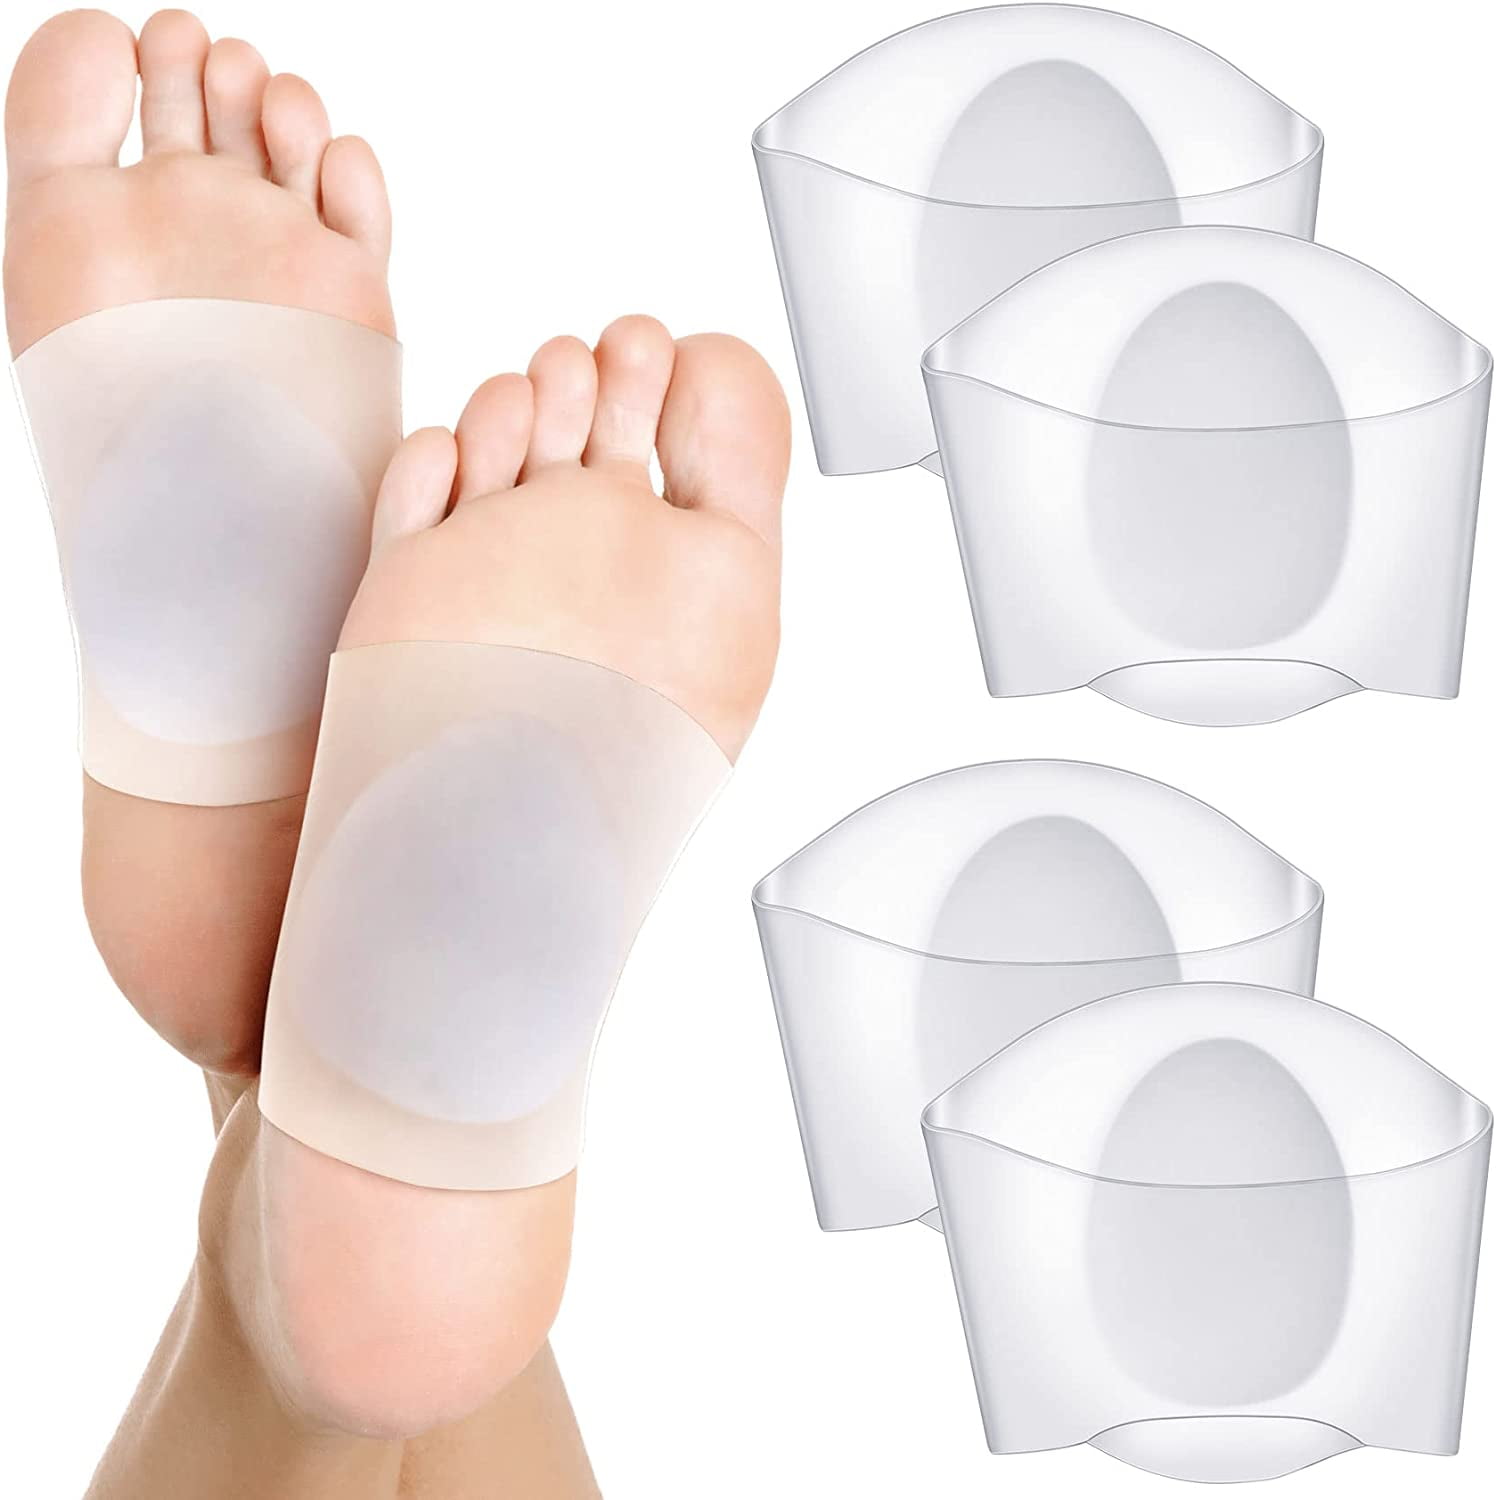 3 Pairs Arch Support Sleeve Flat Foot Shoe Insert Gel Set Arch Supports ...